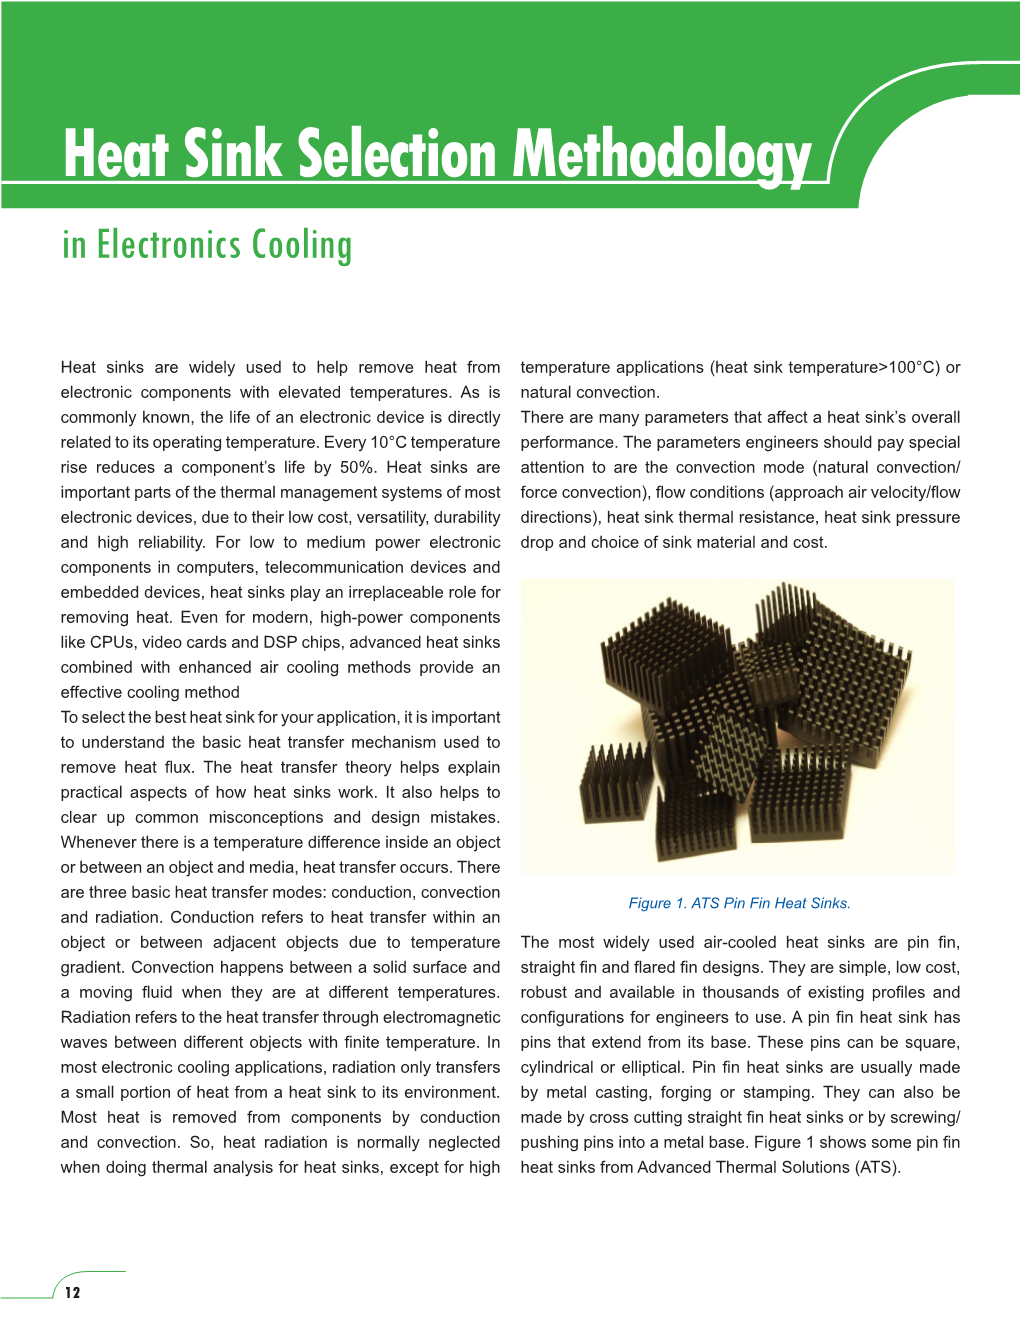 Heat Sink Selection Methodology in Electronics Cooling